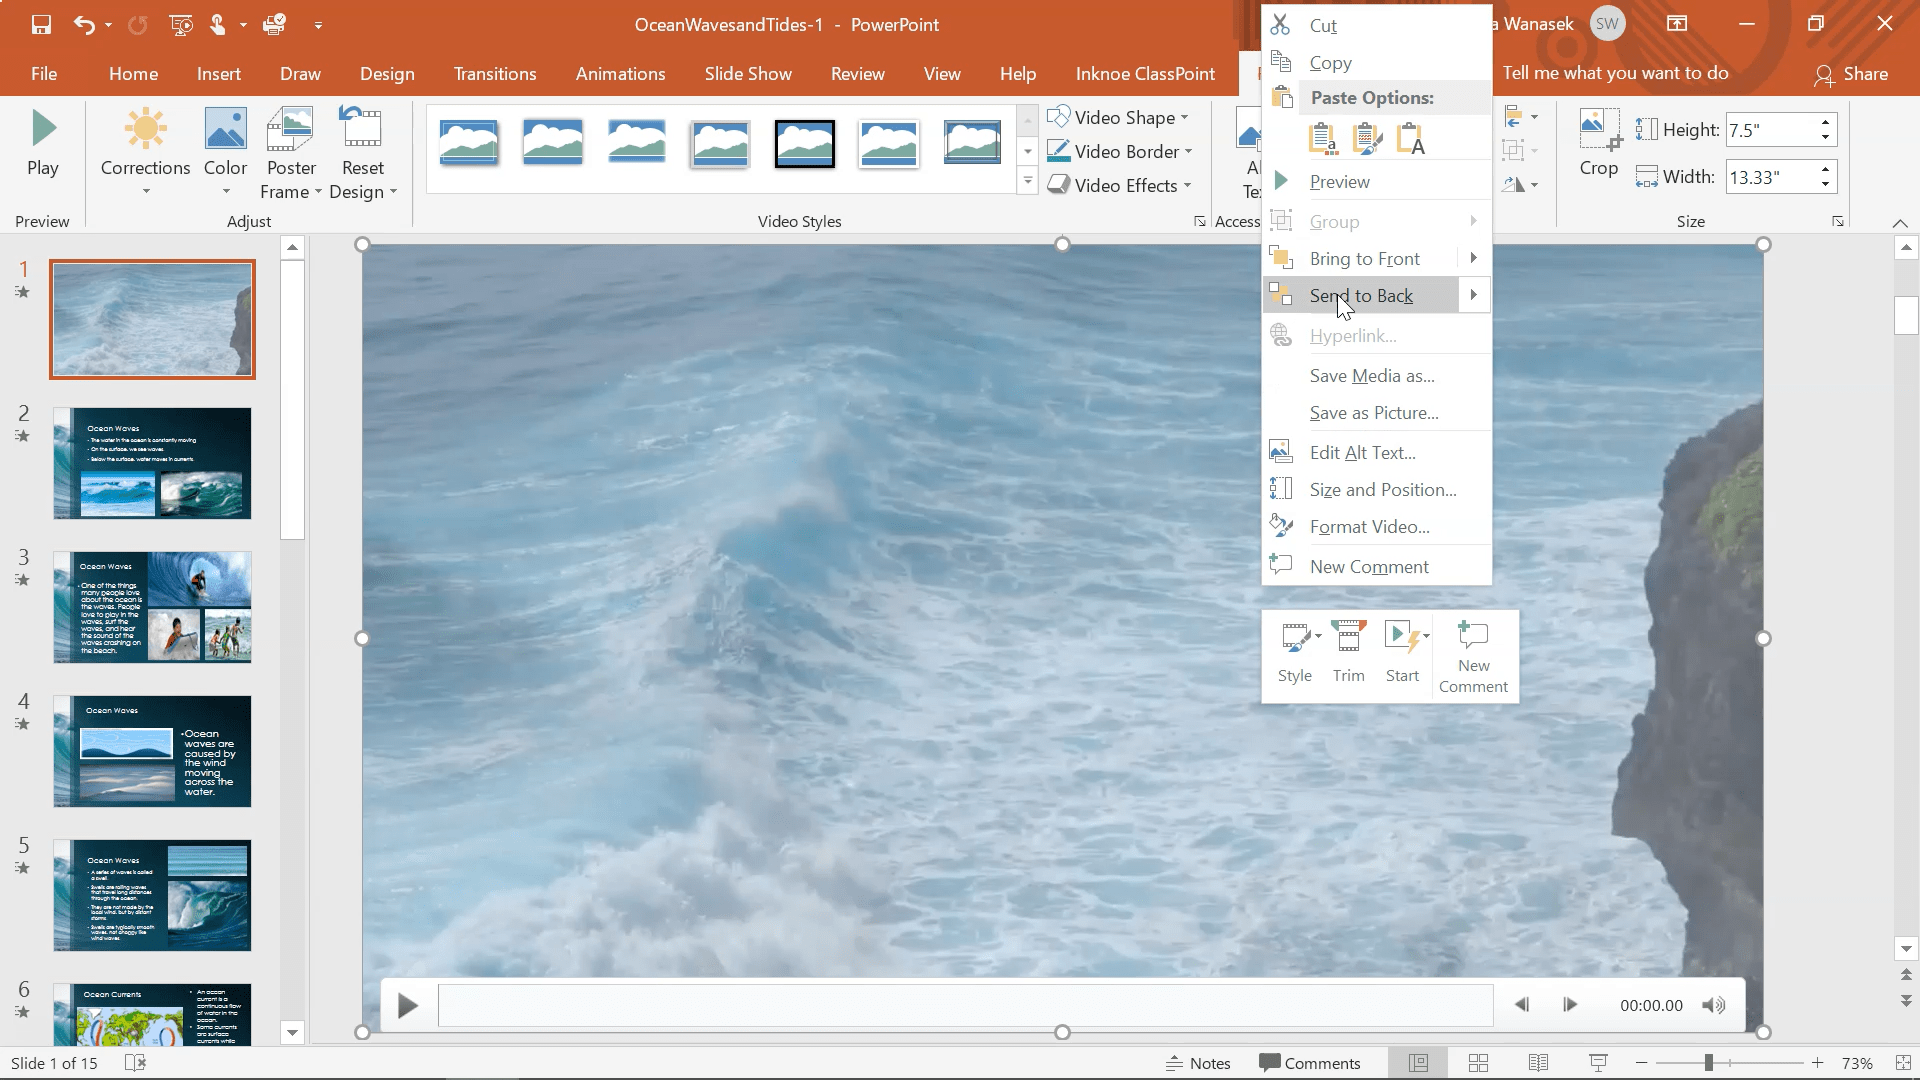 3 ways to create slide backgrounds in PowerPoint